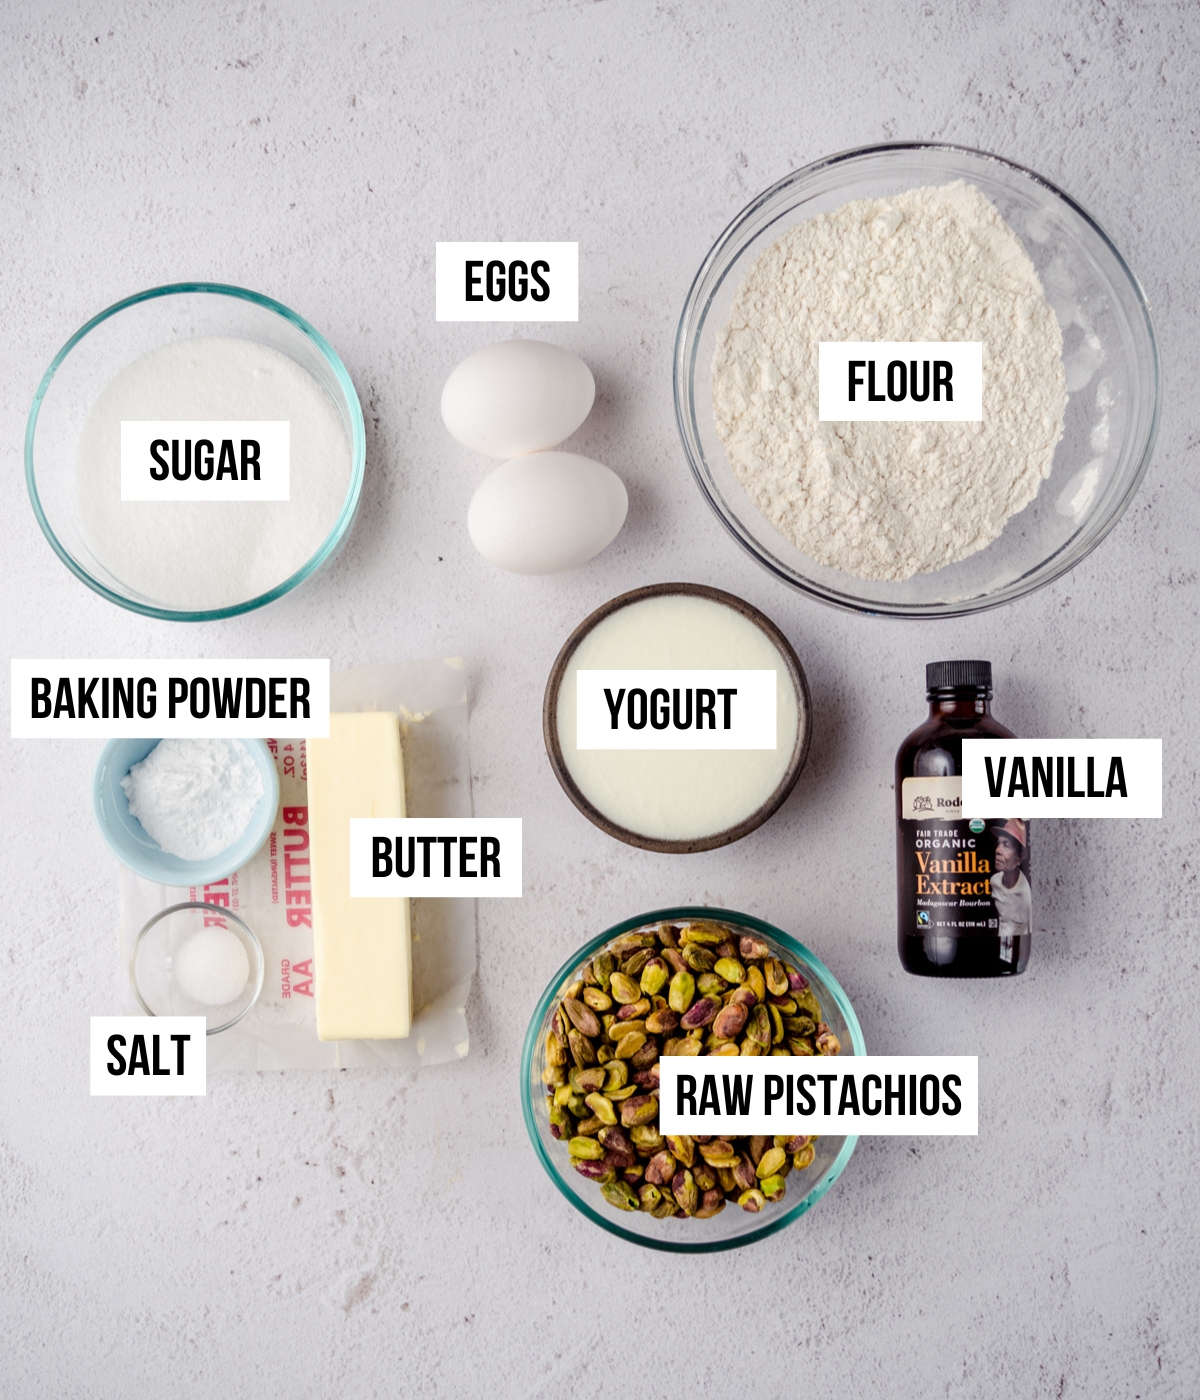 Ingredients for pistachio muffins with text overlay.